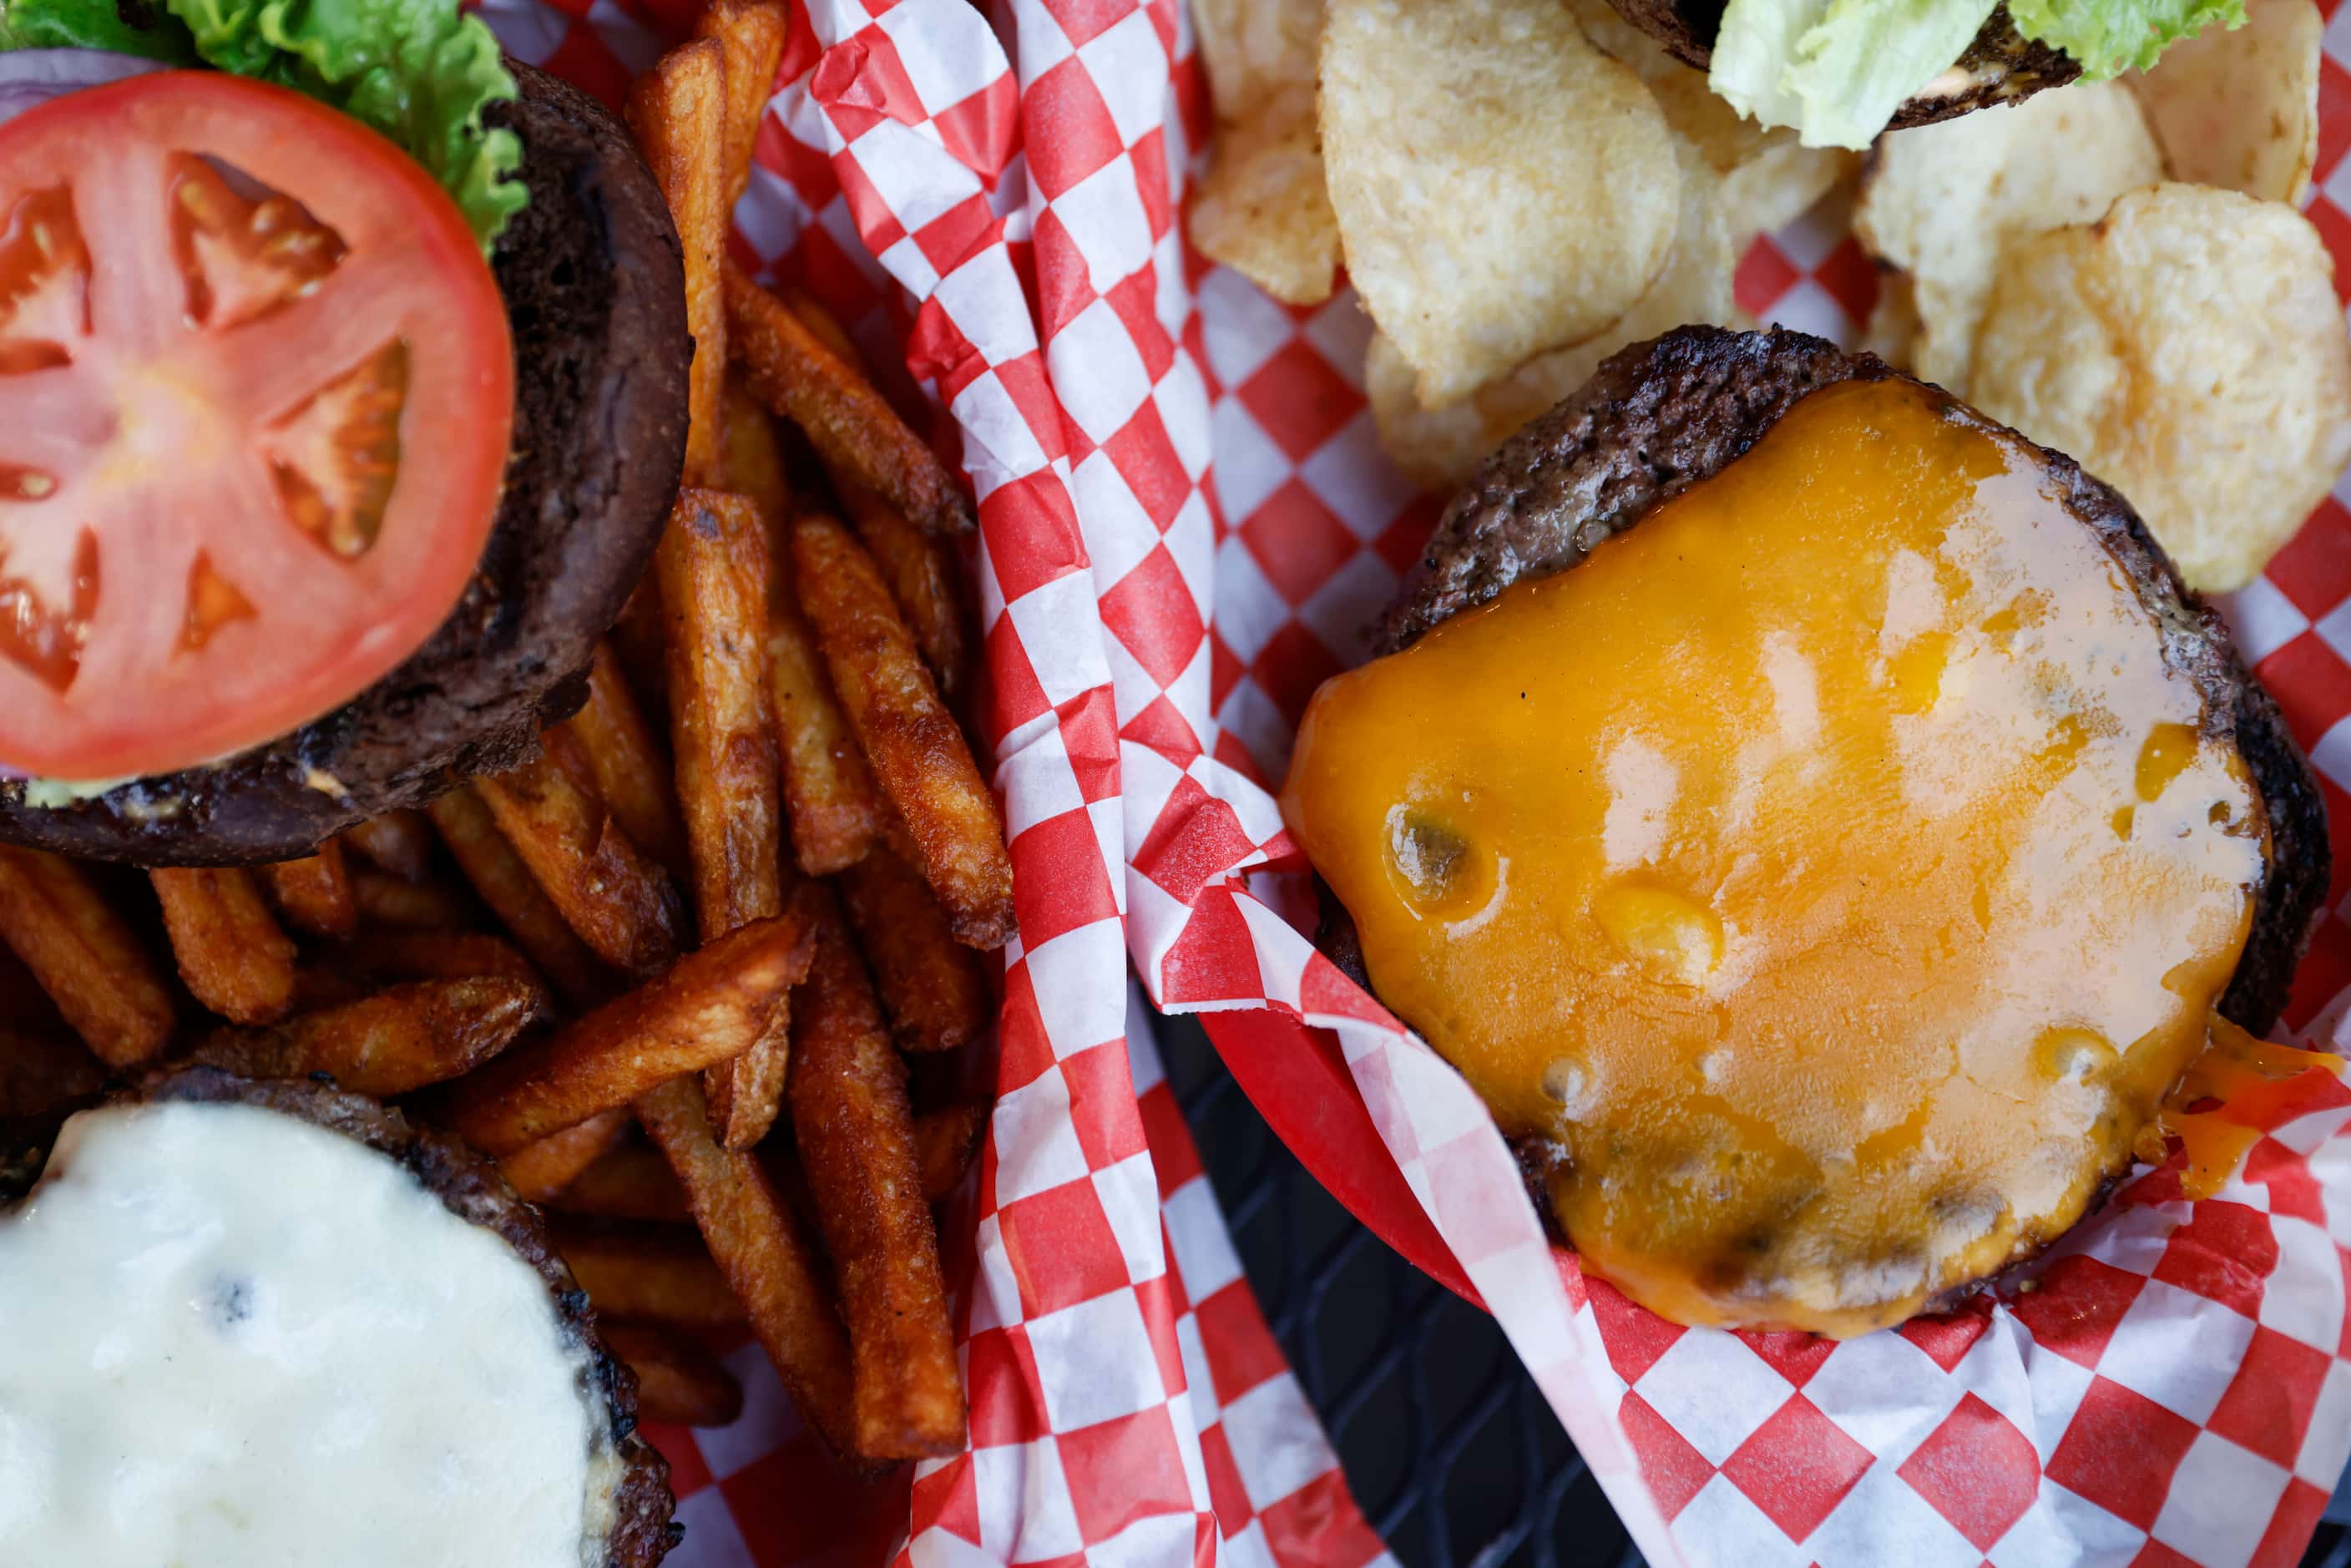 The cheeseburger at the Stoneleigh P has been famous for decades in Dallas.